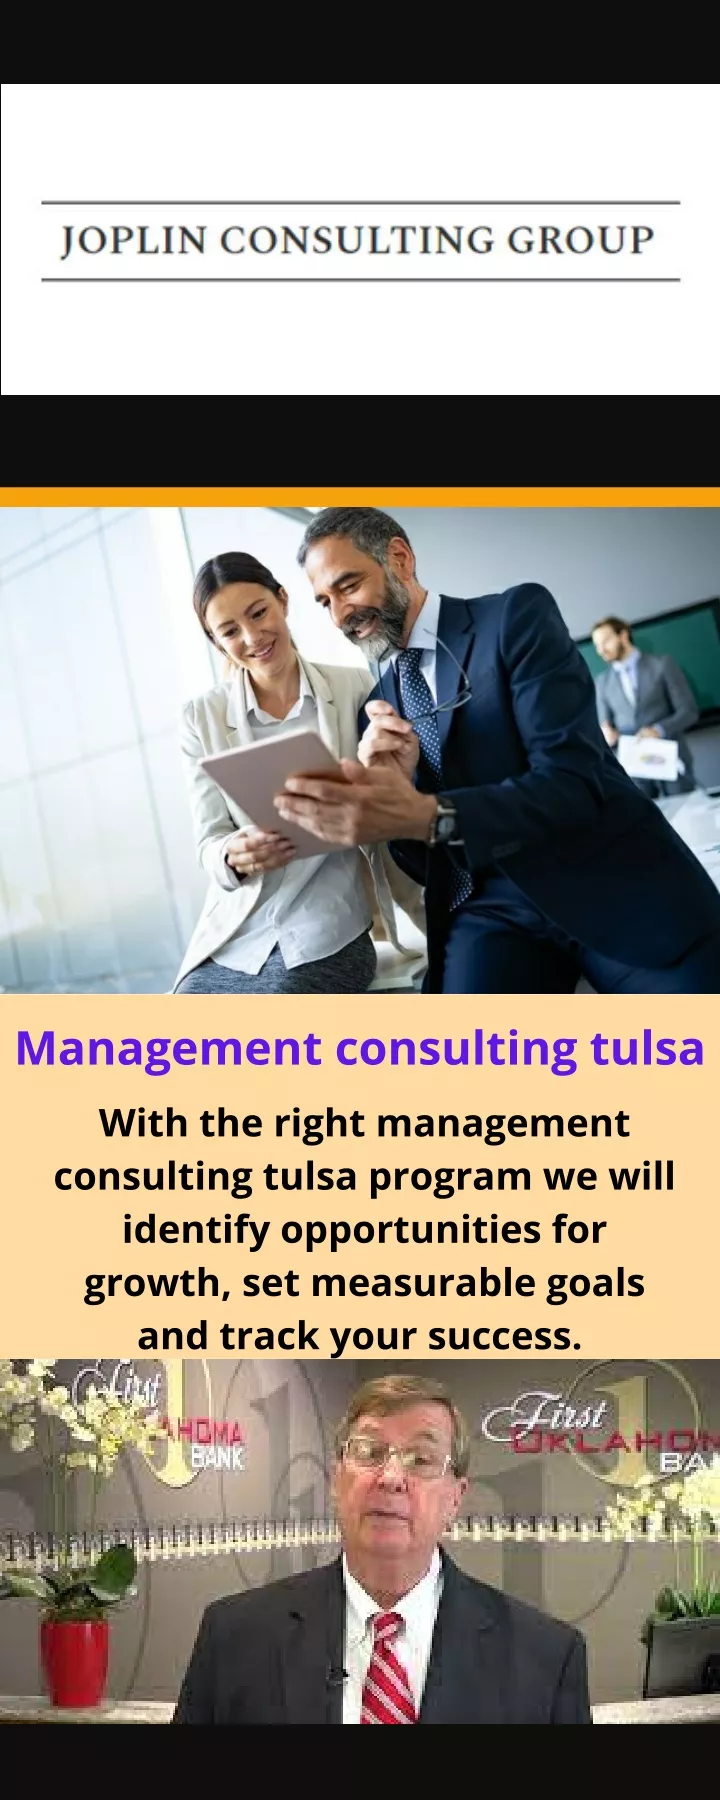 management consulting tulsa with the right